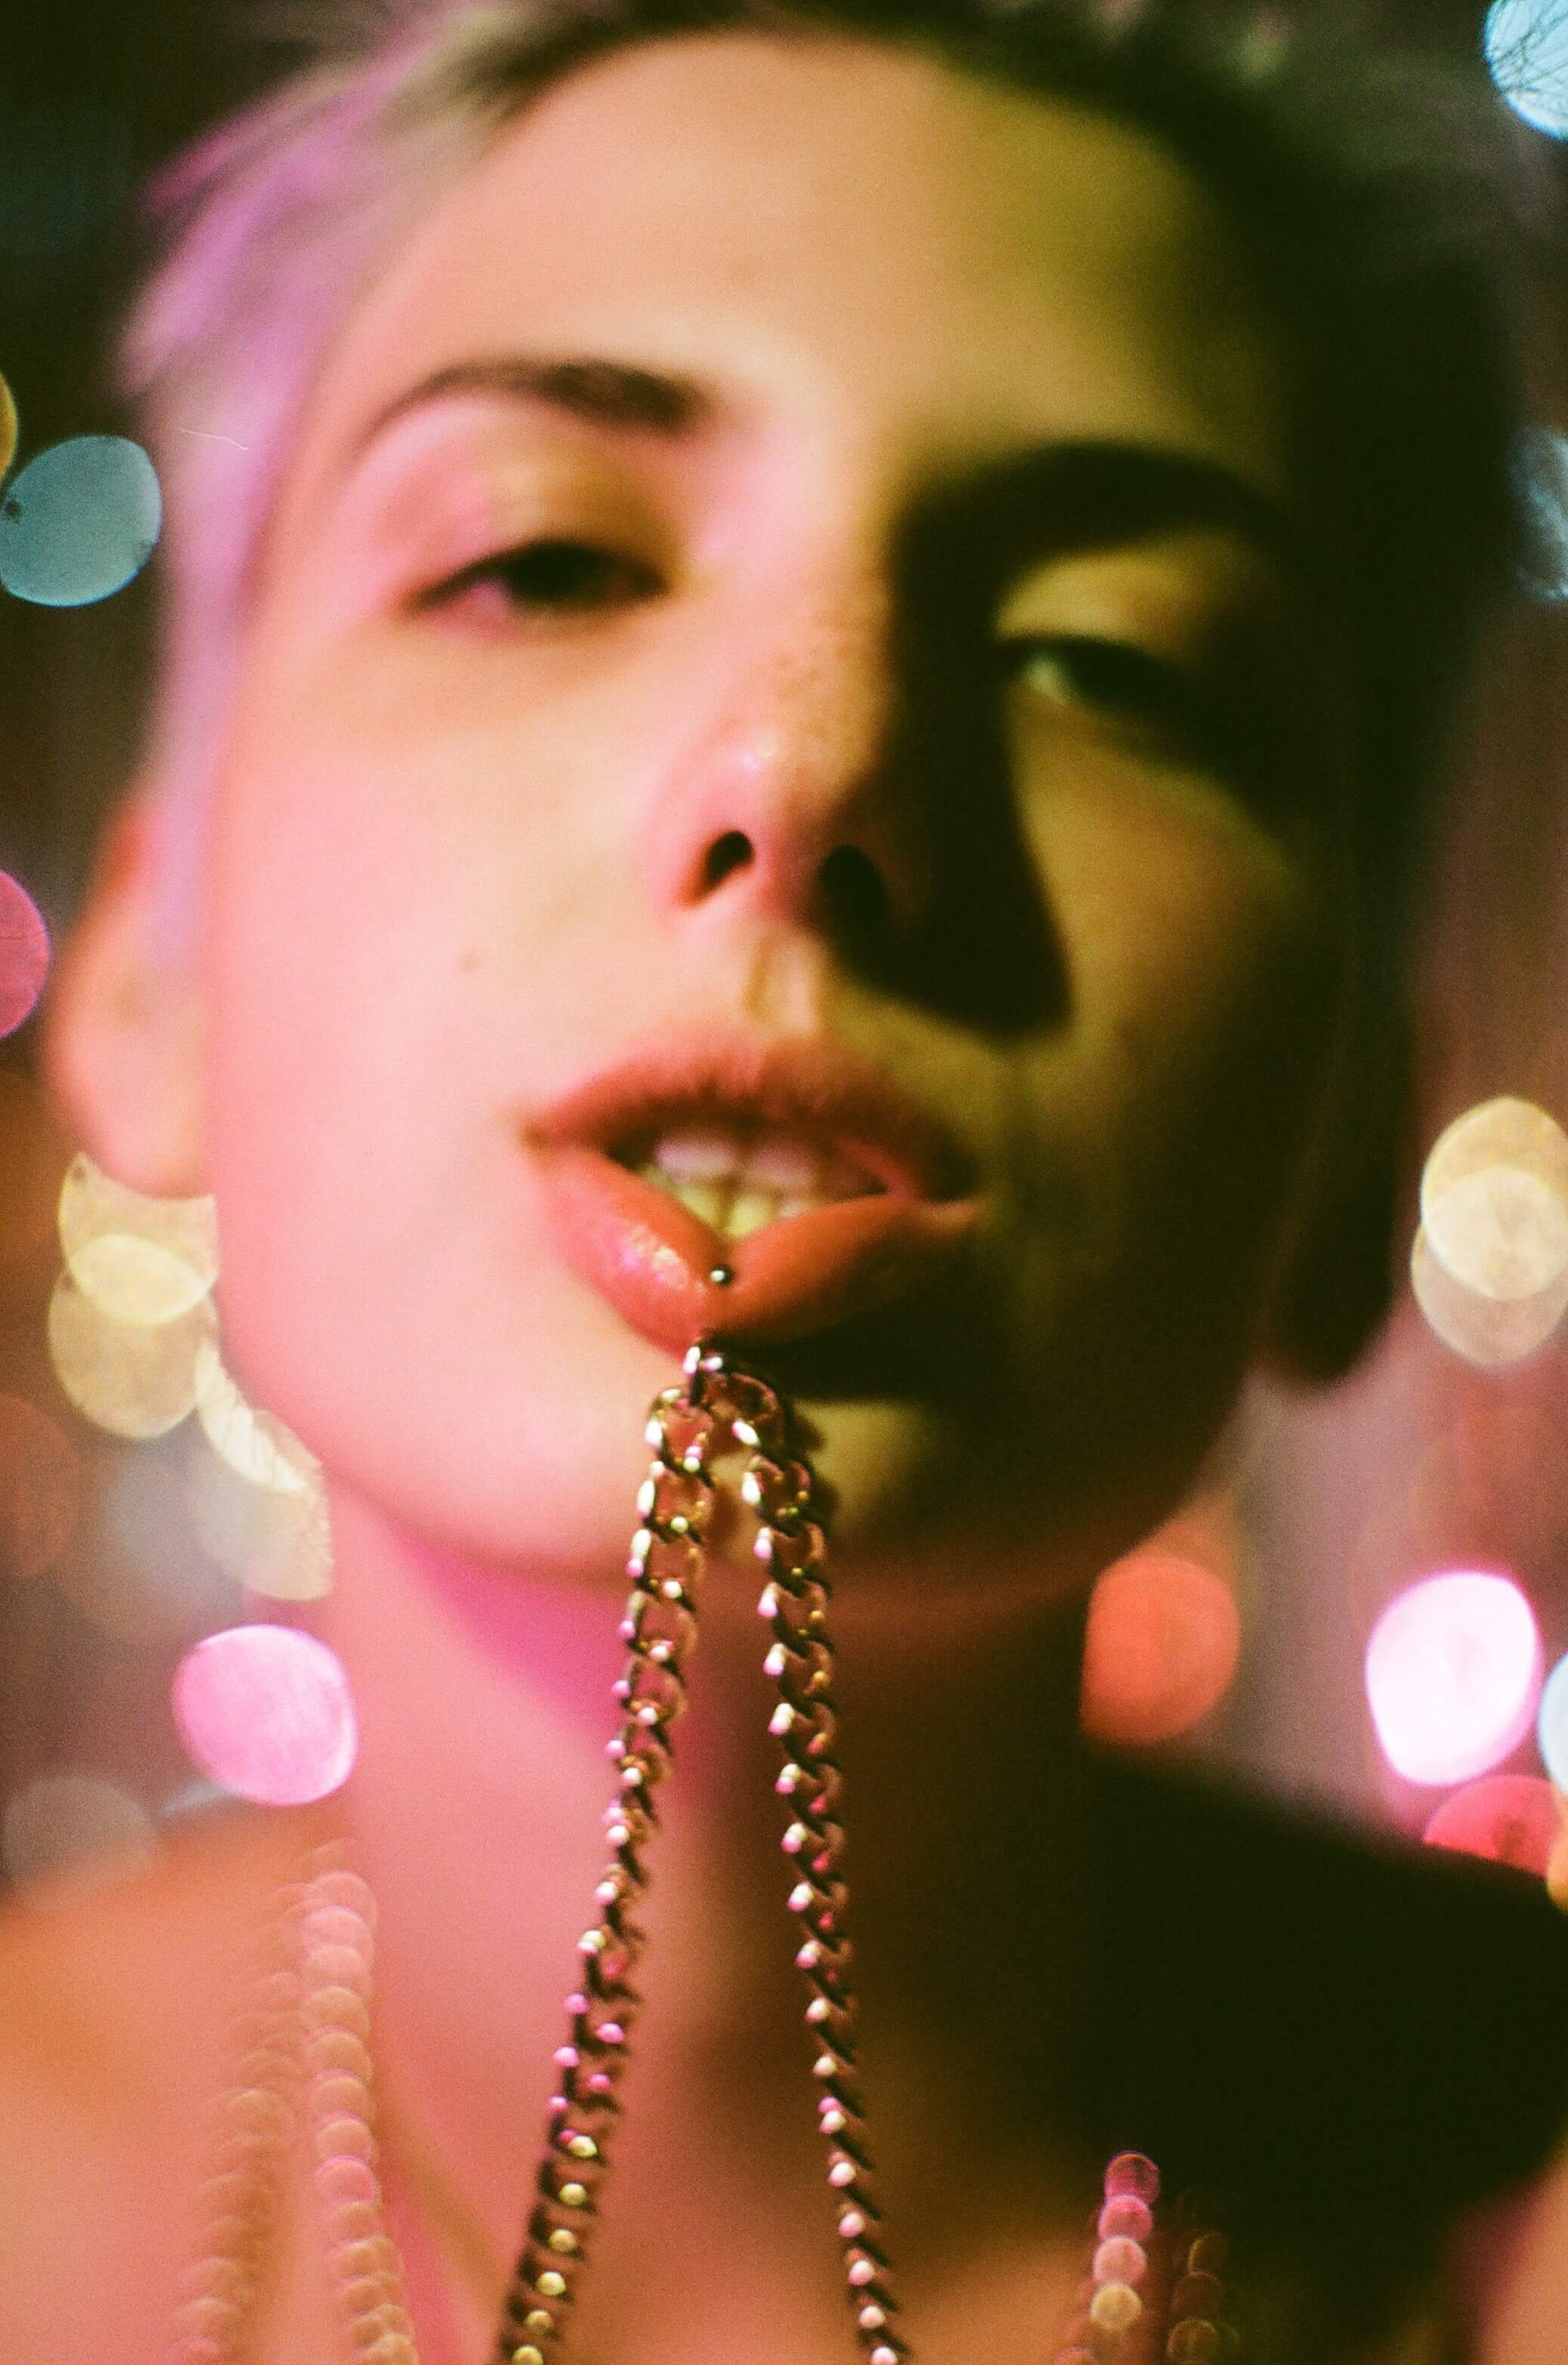 Close up shot of the model's face. A chain attached to their lip piercing, looking straight at the camera. Coloured, sparkly background and coloured lighting